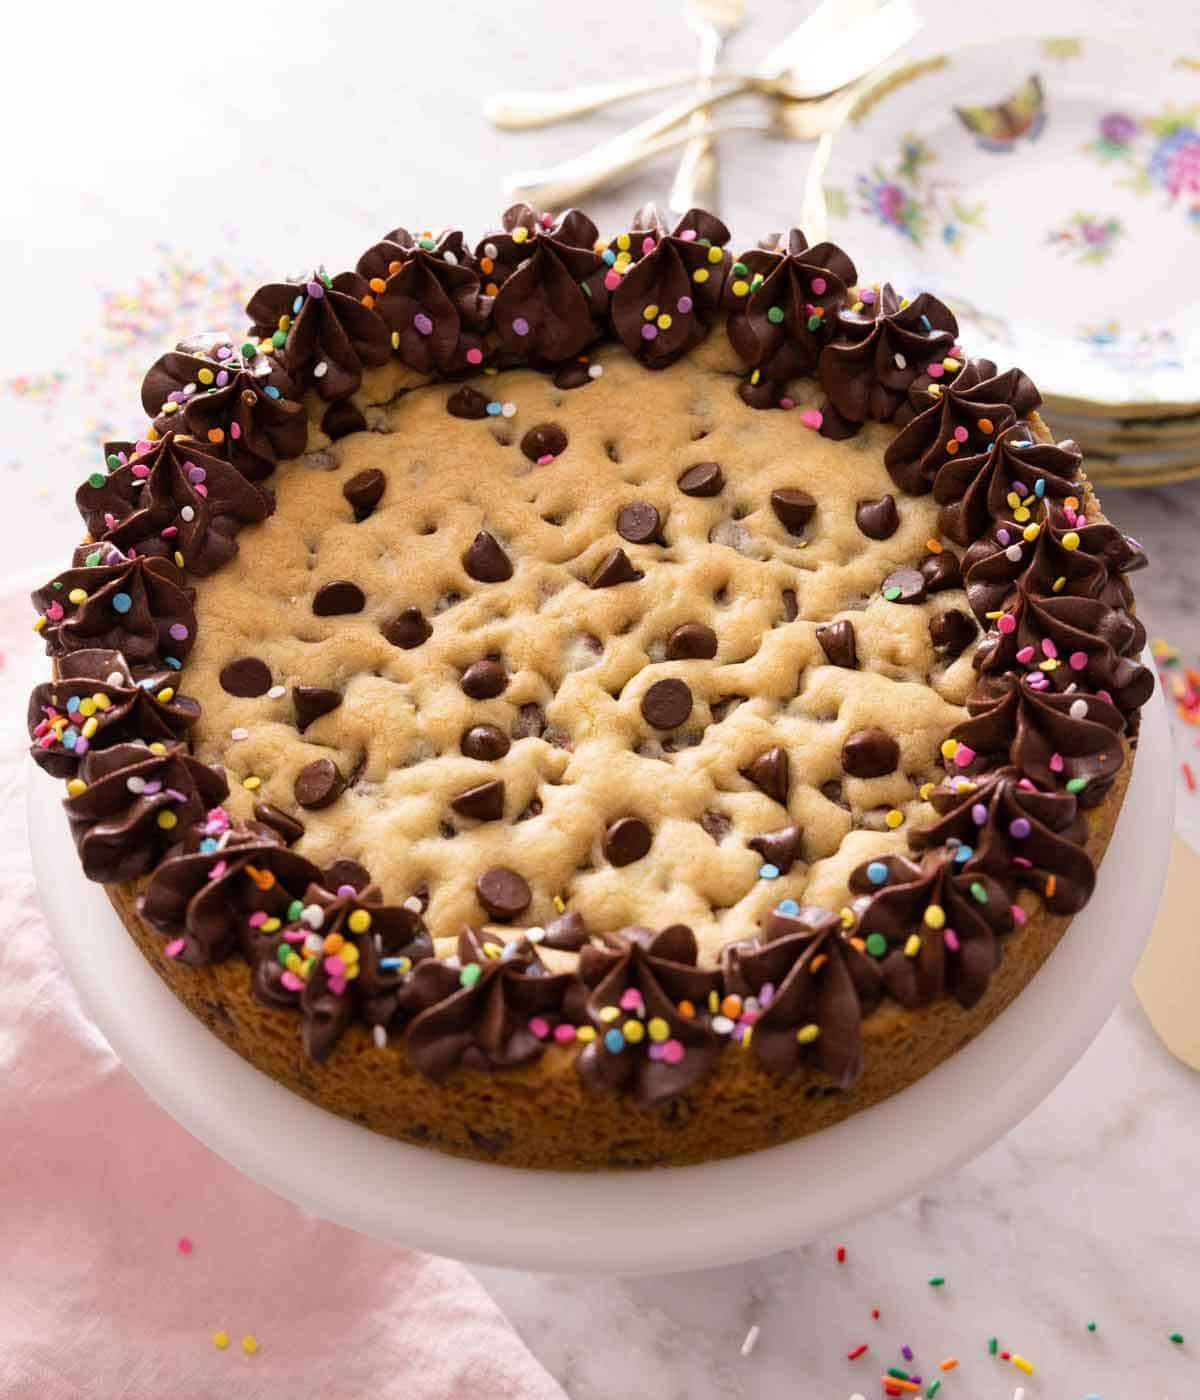 A cookie cake with chocolate frosting with sprinkles on a cake stand.